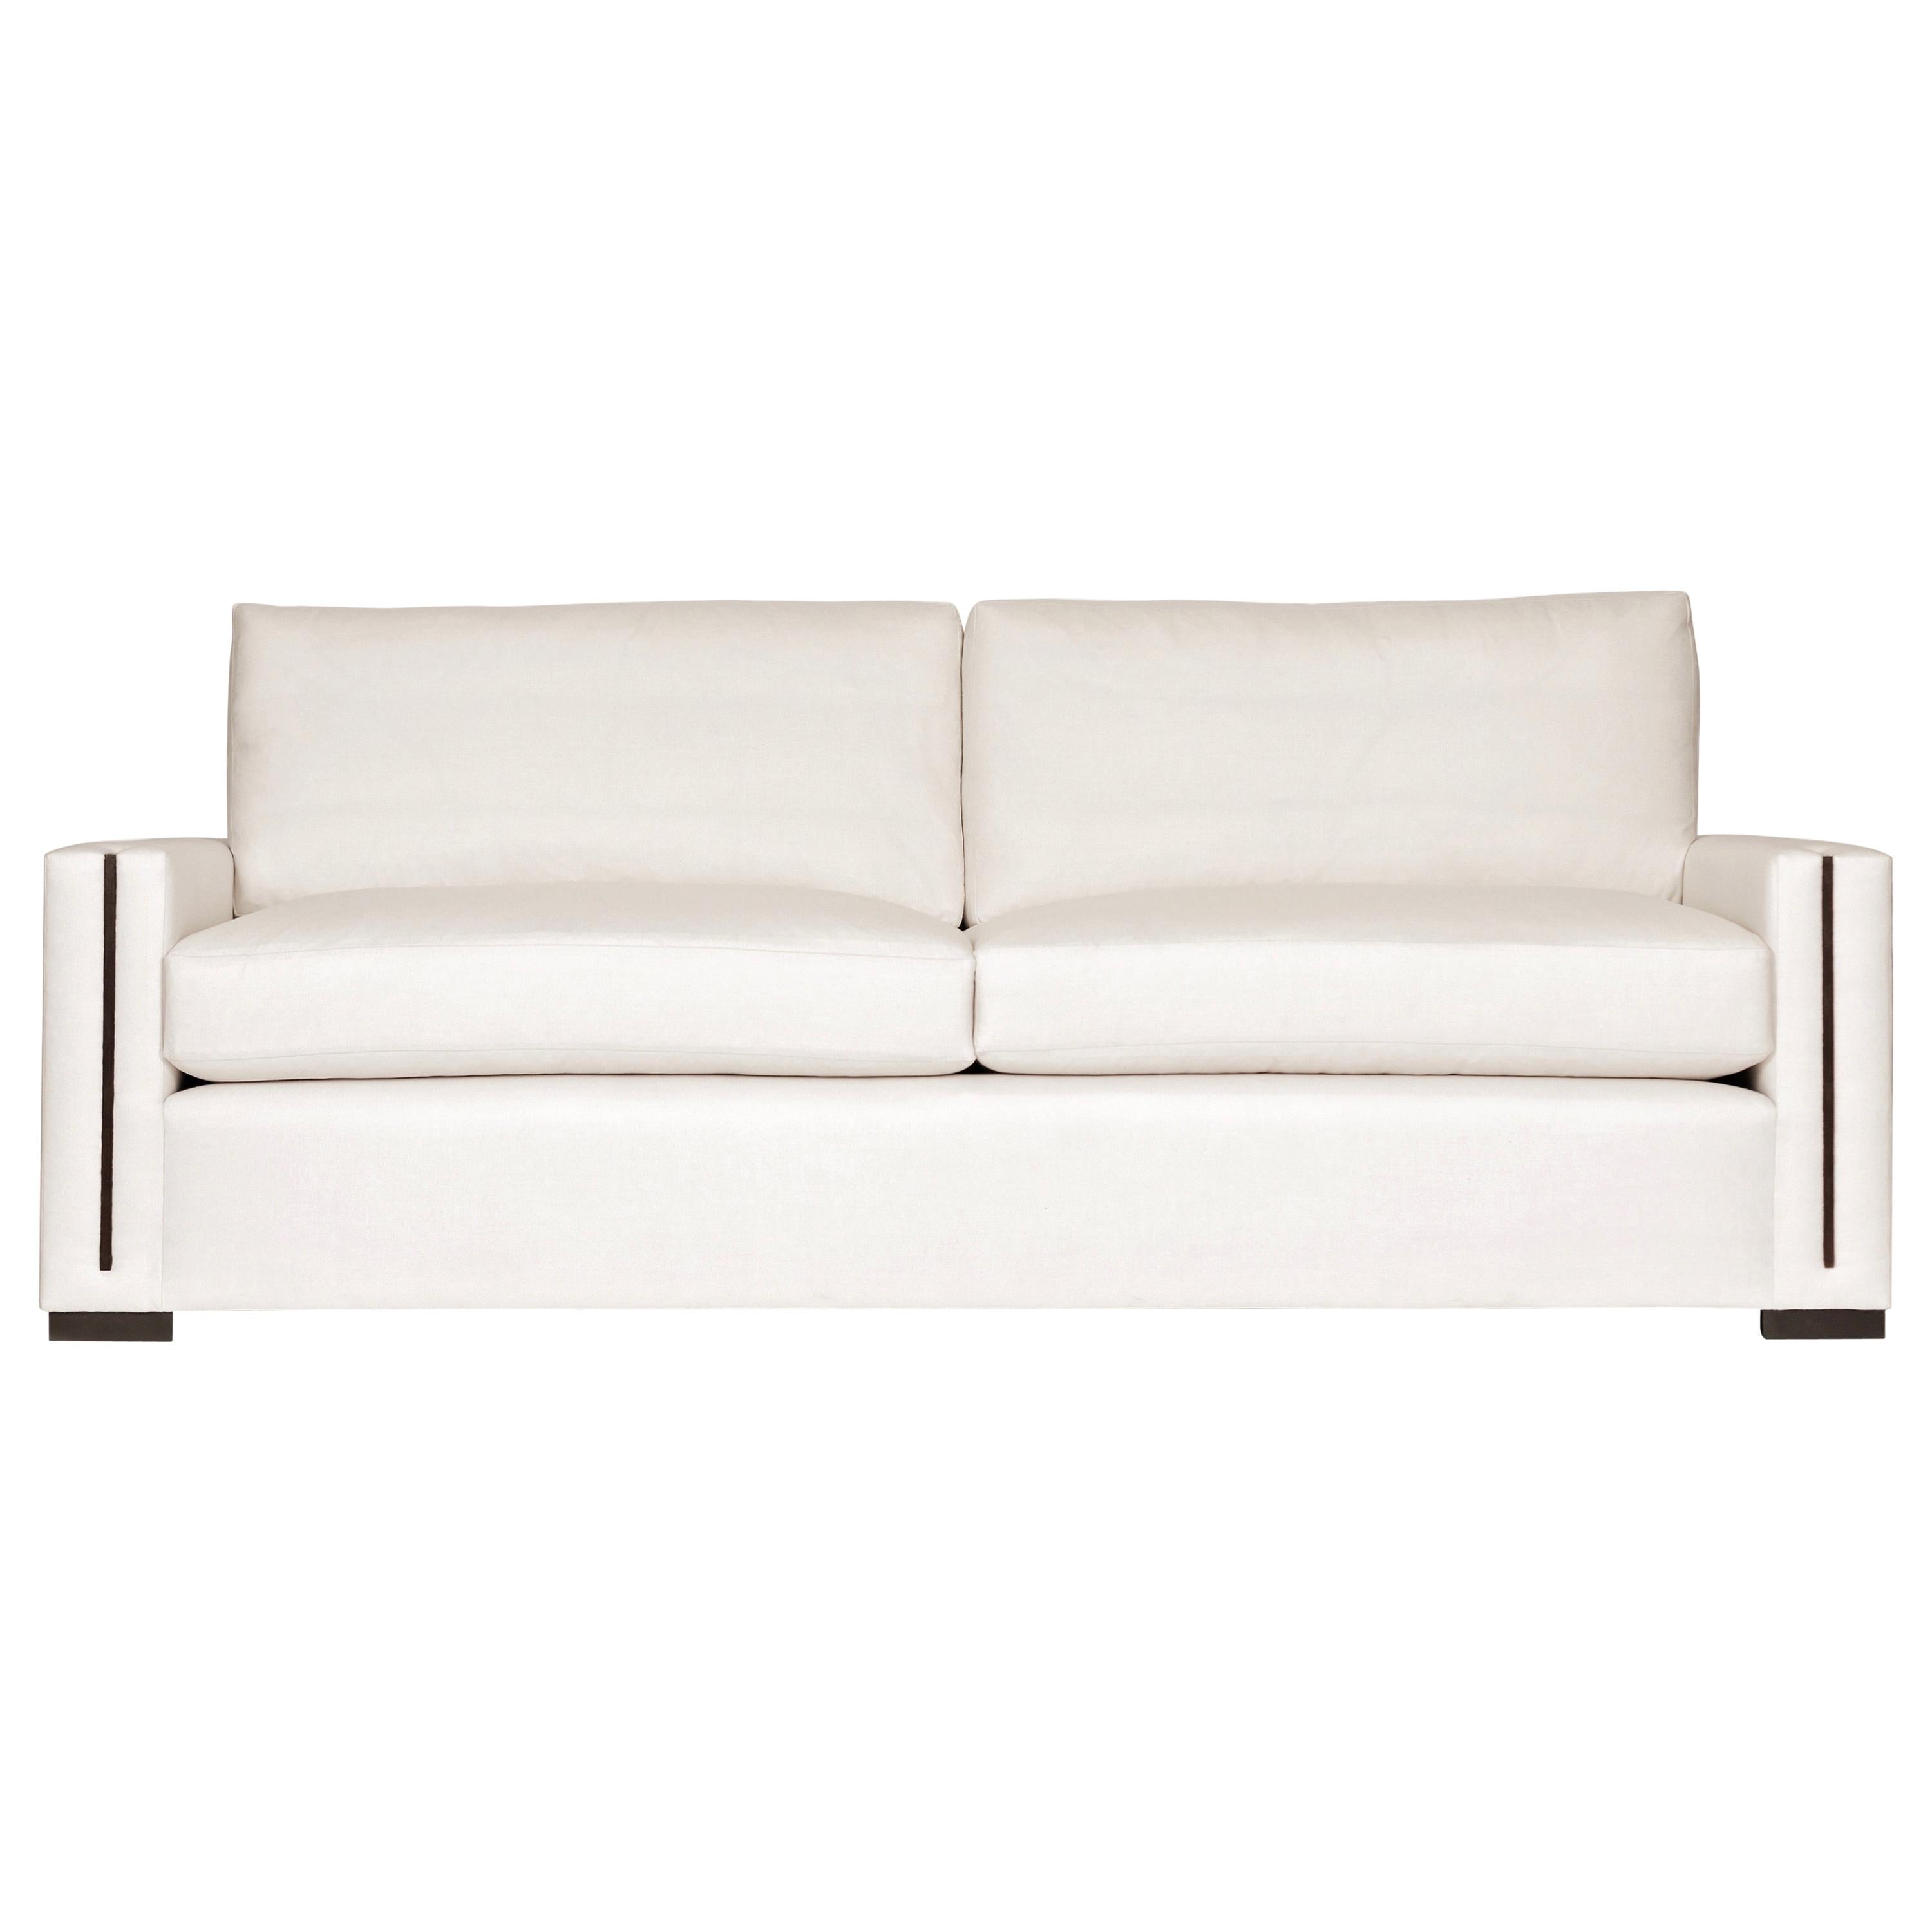 Jude Sofa For Sale